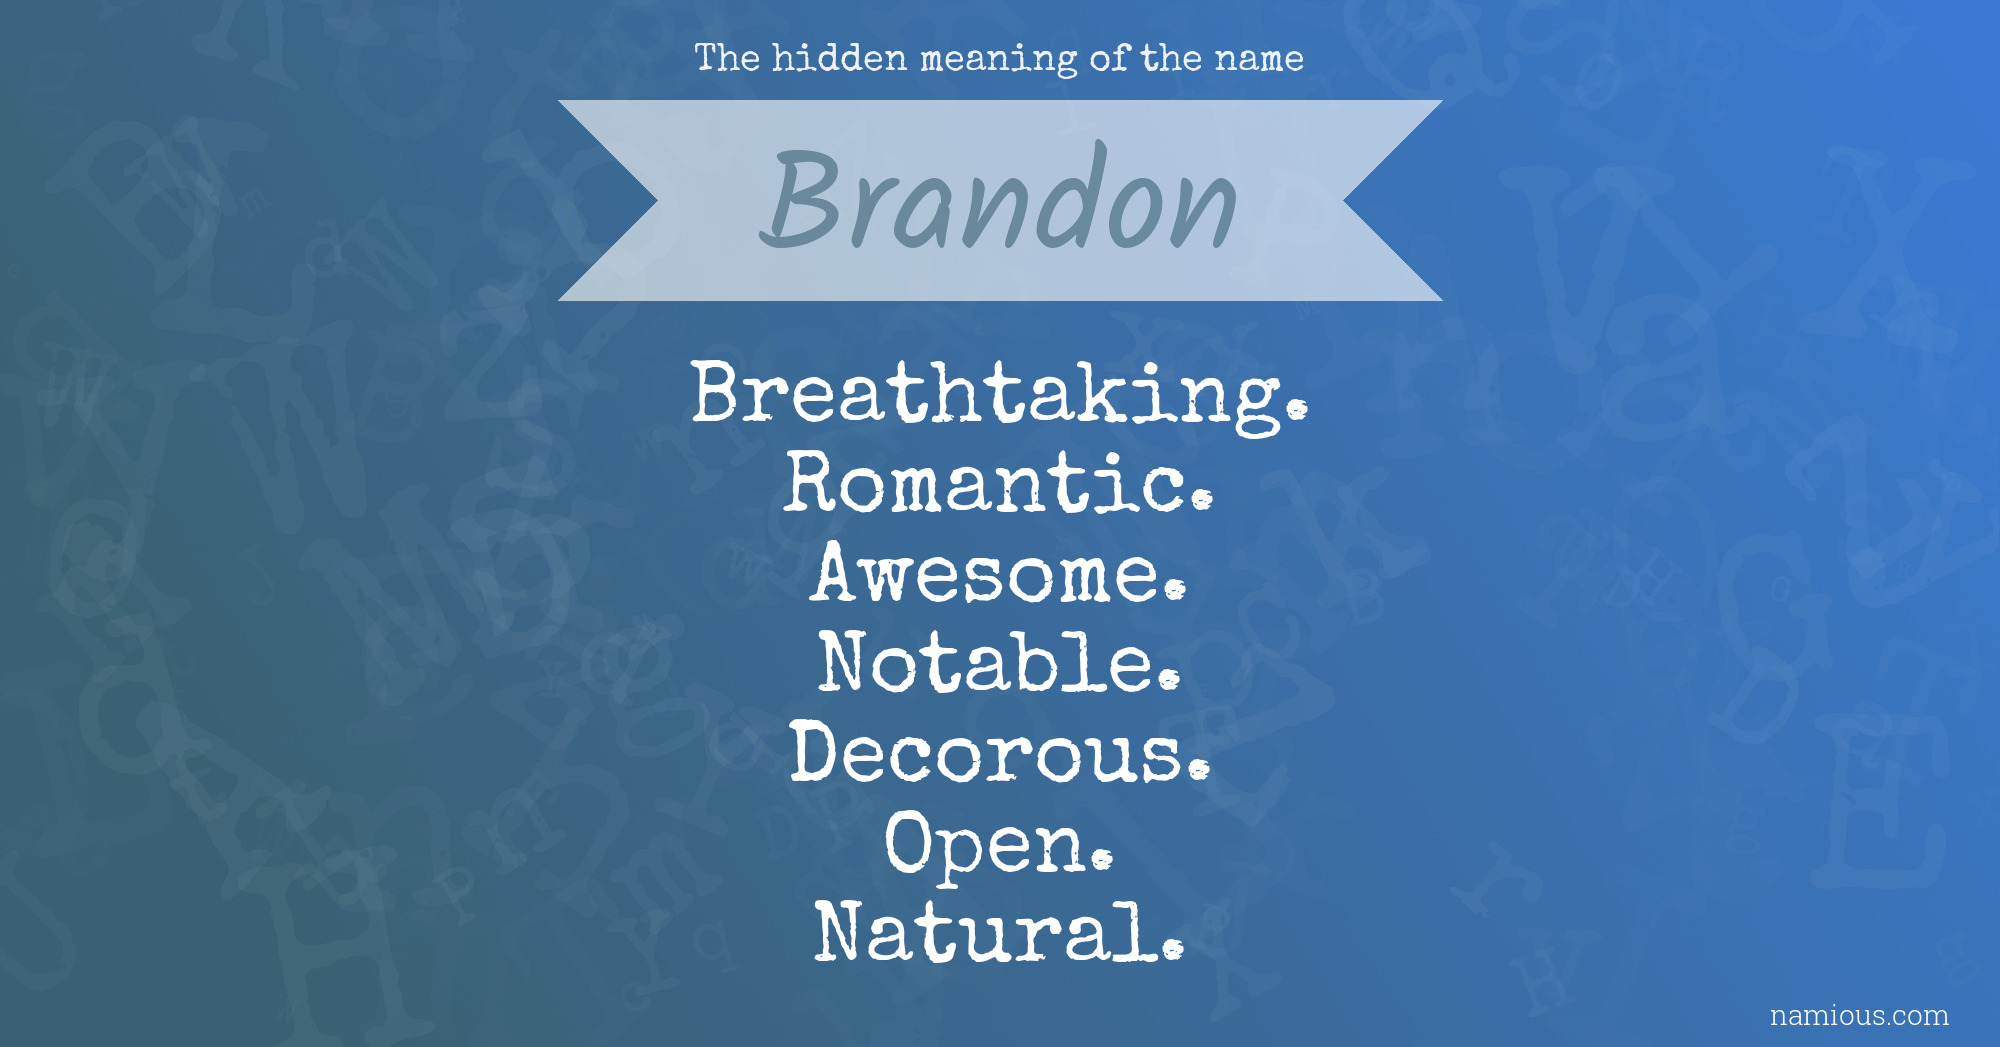 The hidden meaning of the name Brandon